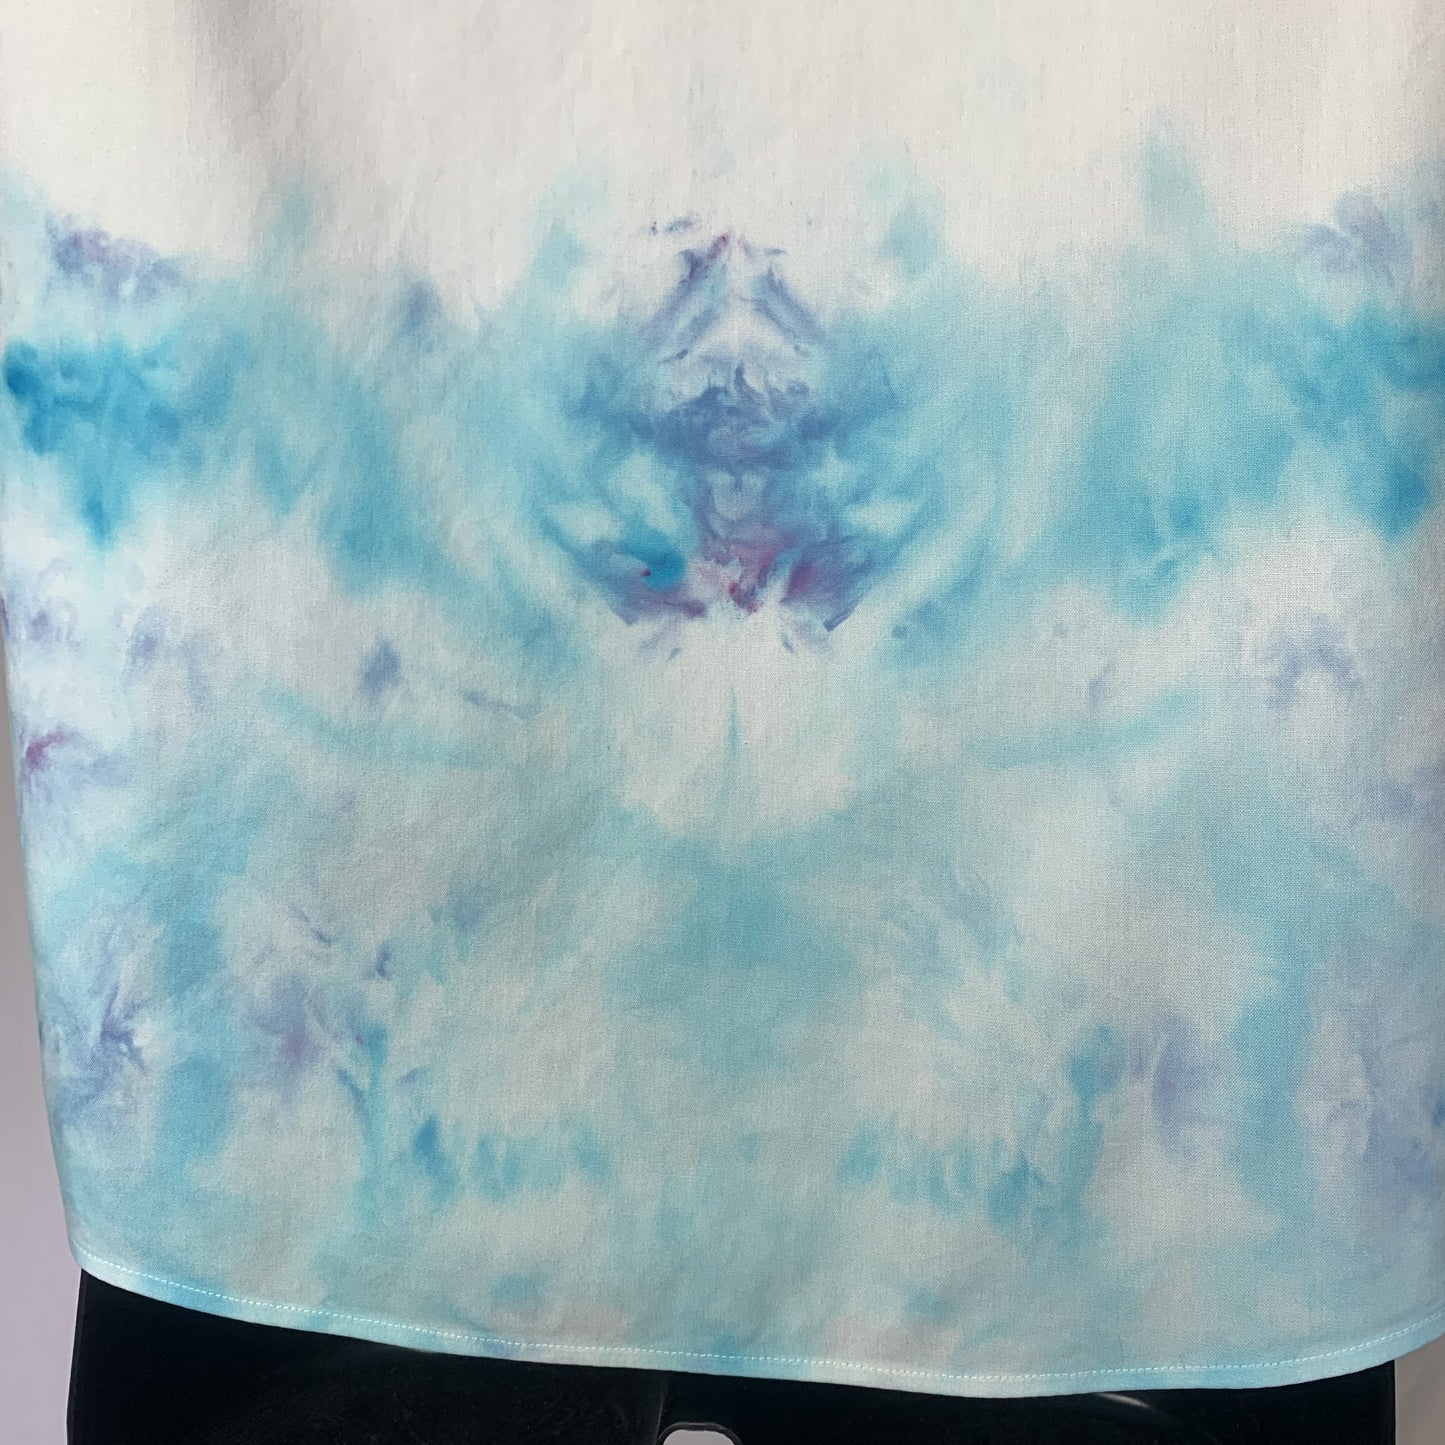 Blue and Purple Watercolor Fantasy | Shirt | 41" chest